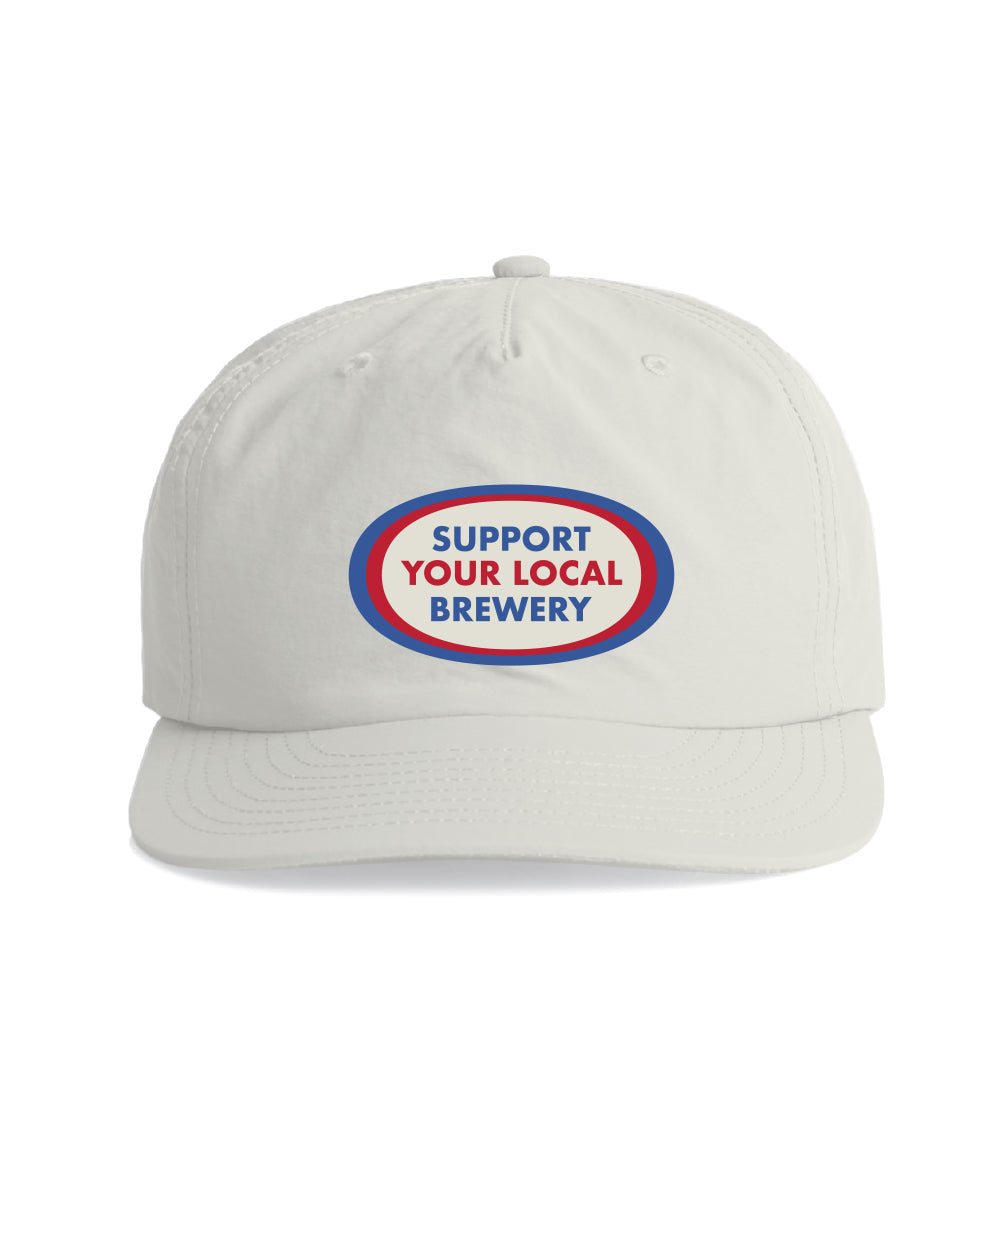 SUPPORT YOUR LOCAL BREWERY SURF CAP - WHITE